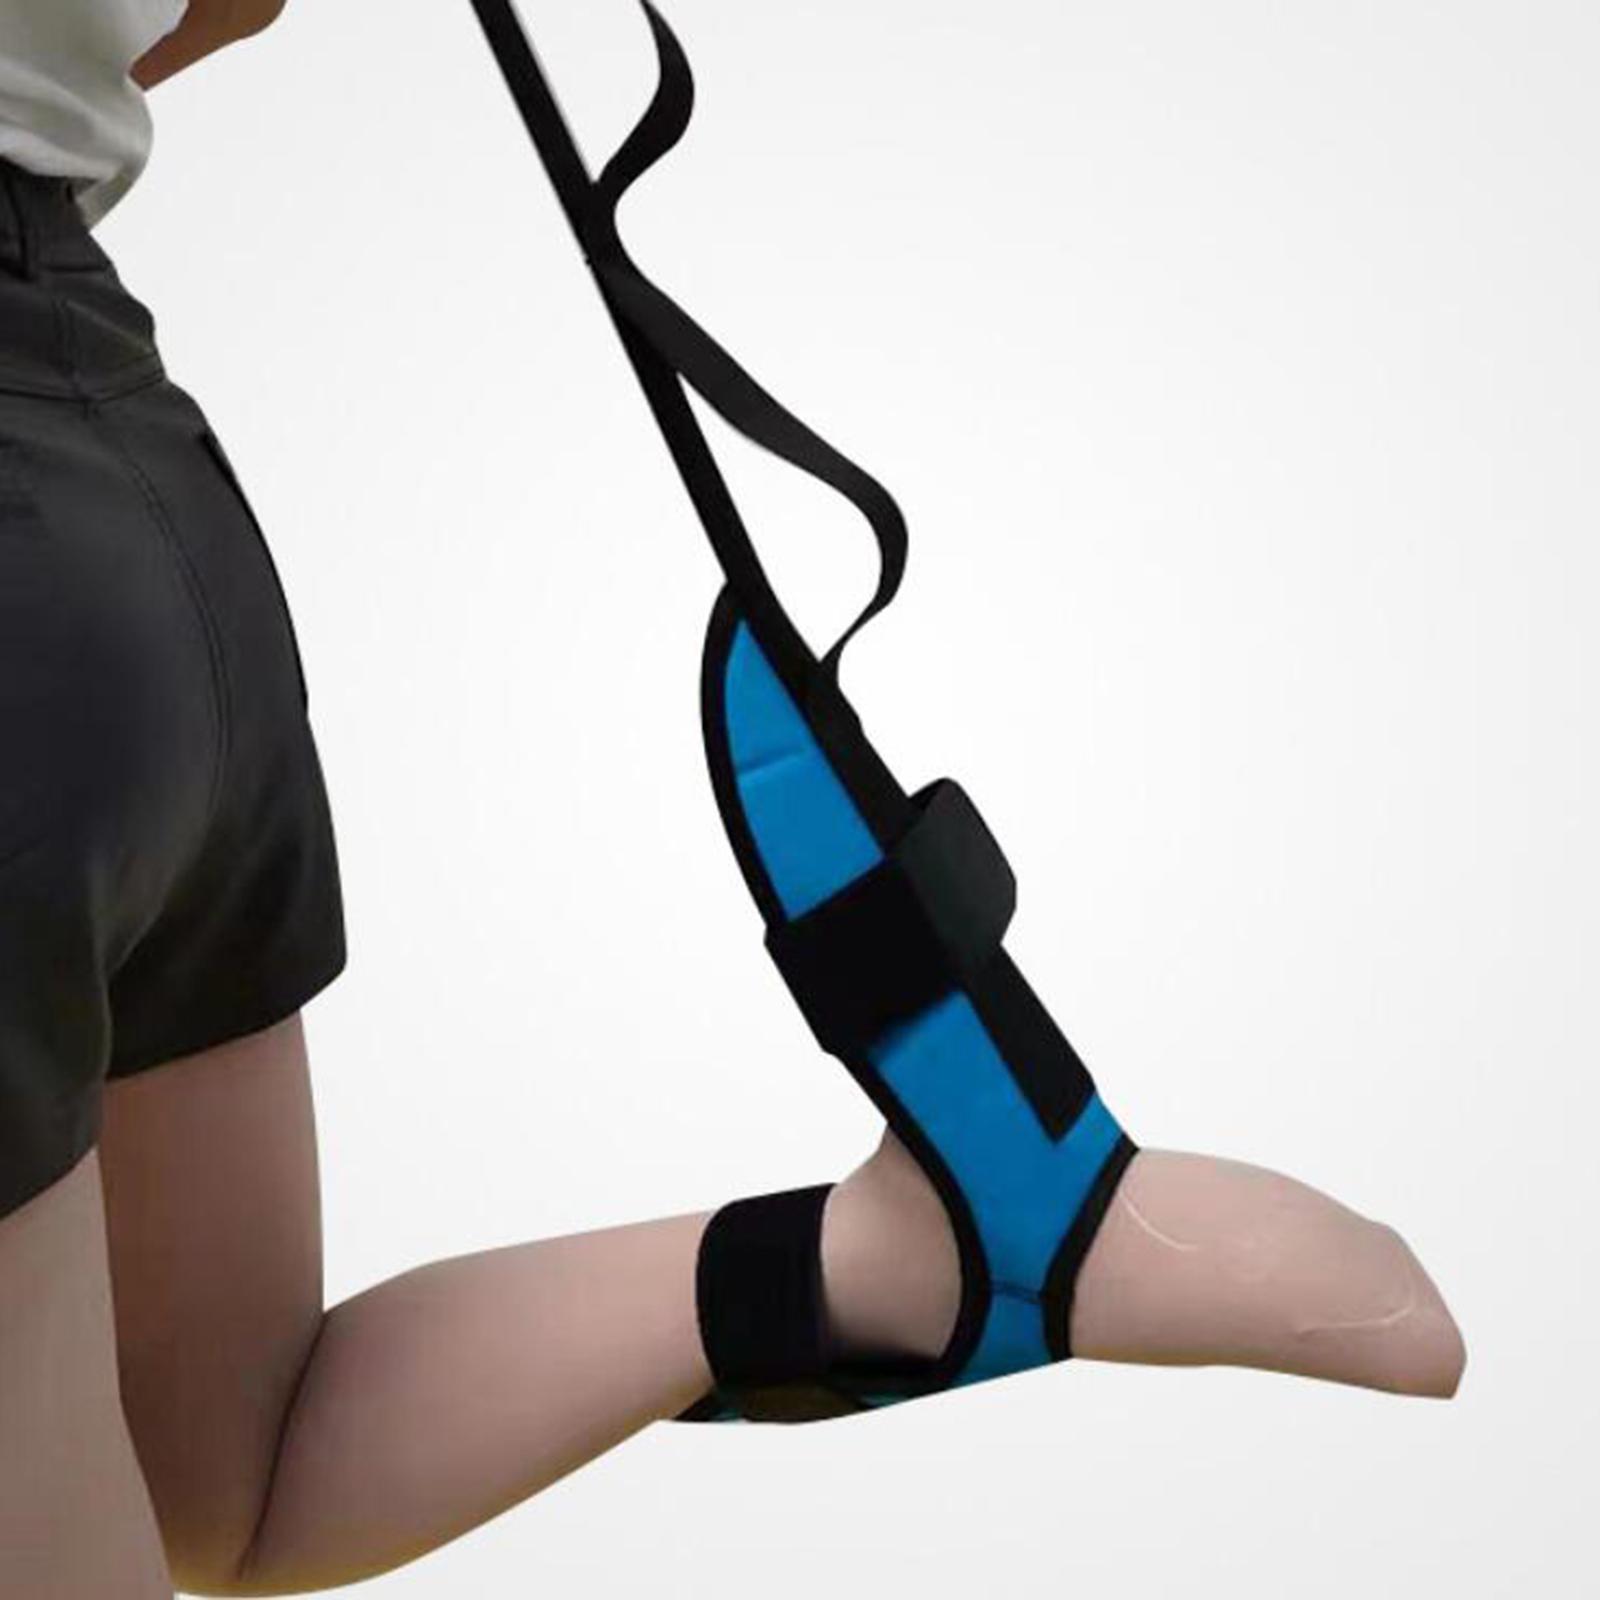 Yoga Stretching Strap Calf Leg Stretcher Tendonitis Band for Exercise Blue